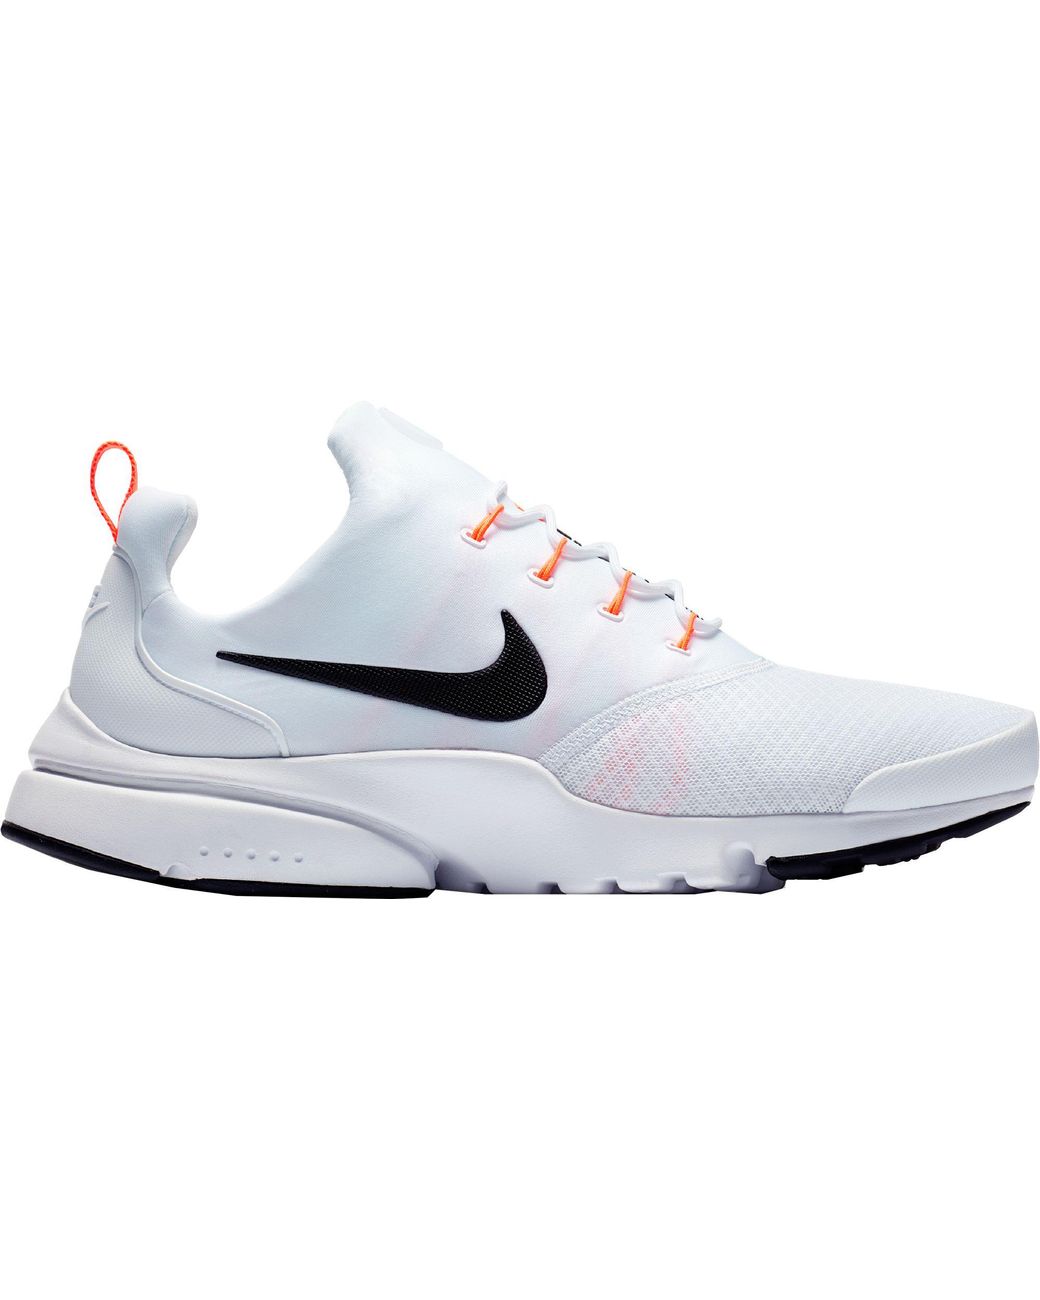 Nike Presto Fly For Running Cheapest Dealers, 53% OFF | maikyaulaw.com